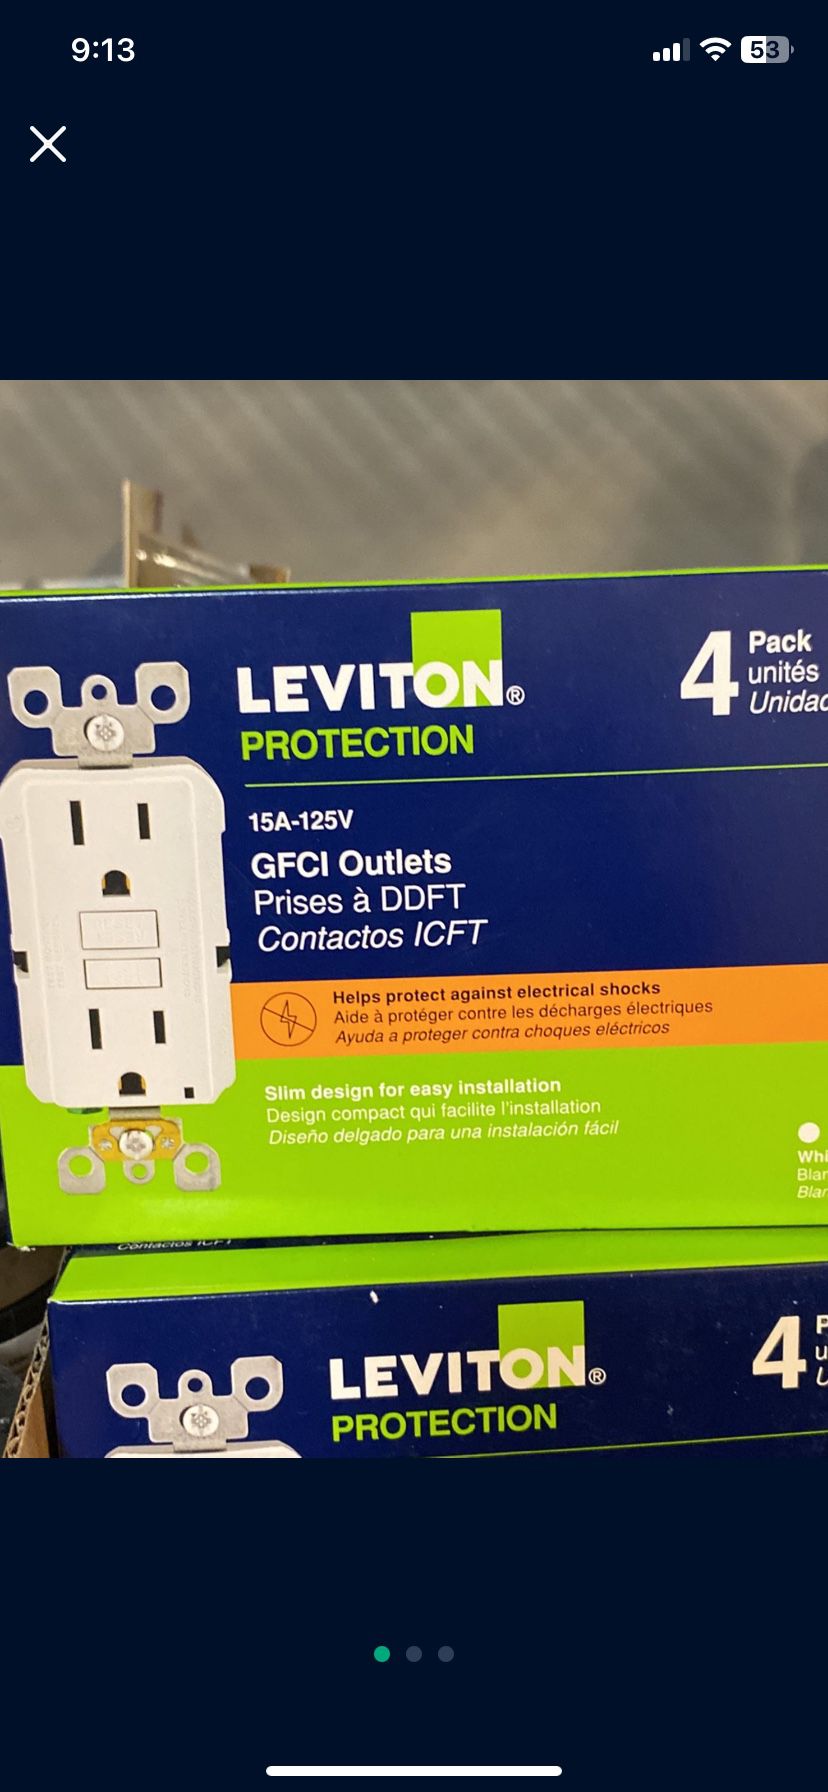  7 New Boxes Of 4 Pack Of Leviton GFI Outlets 